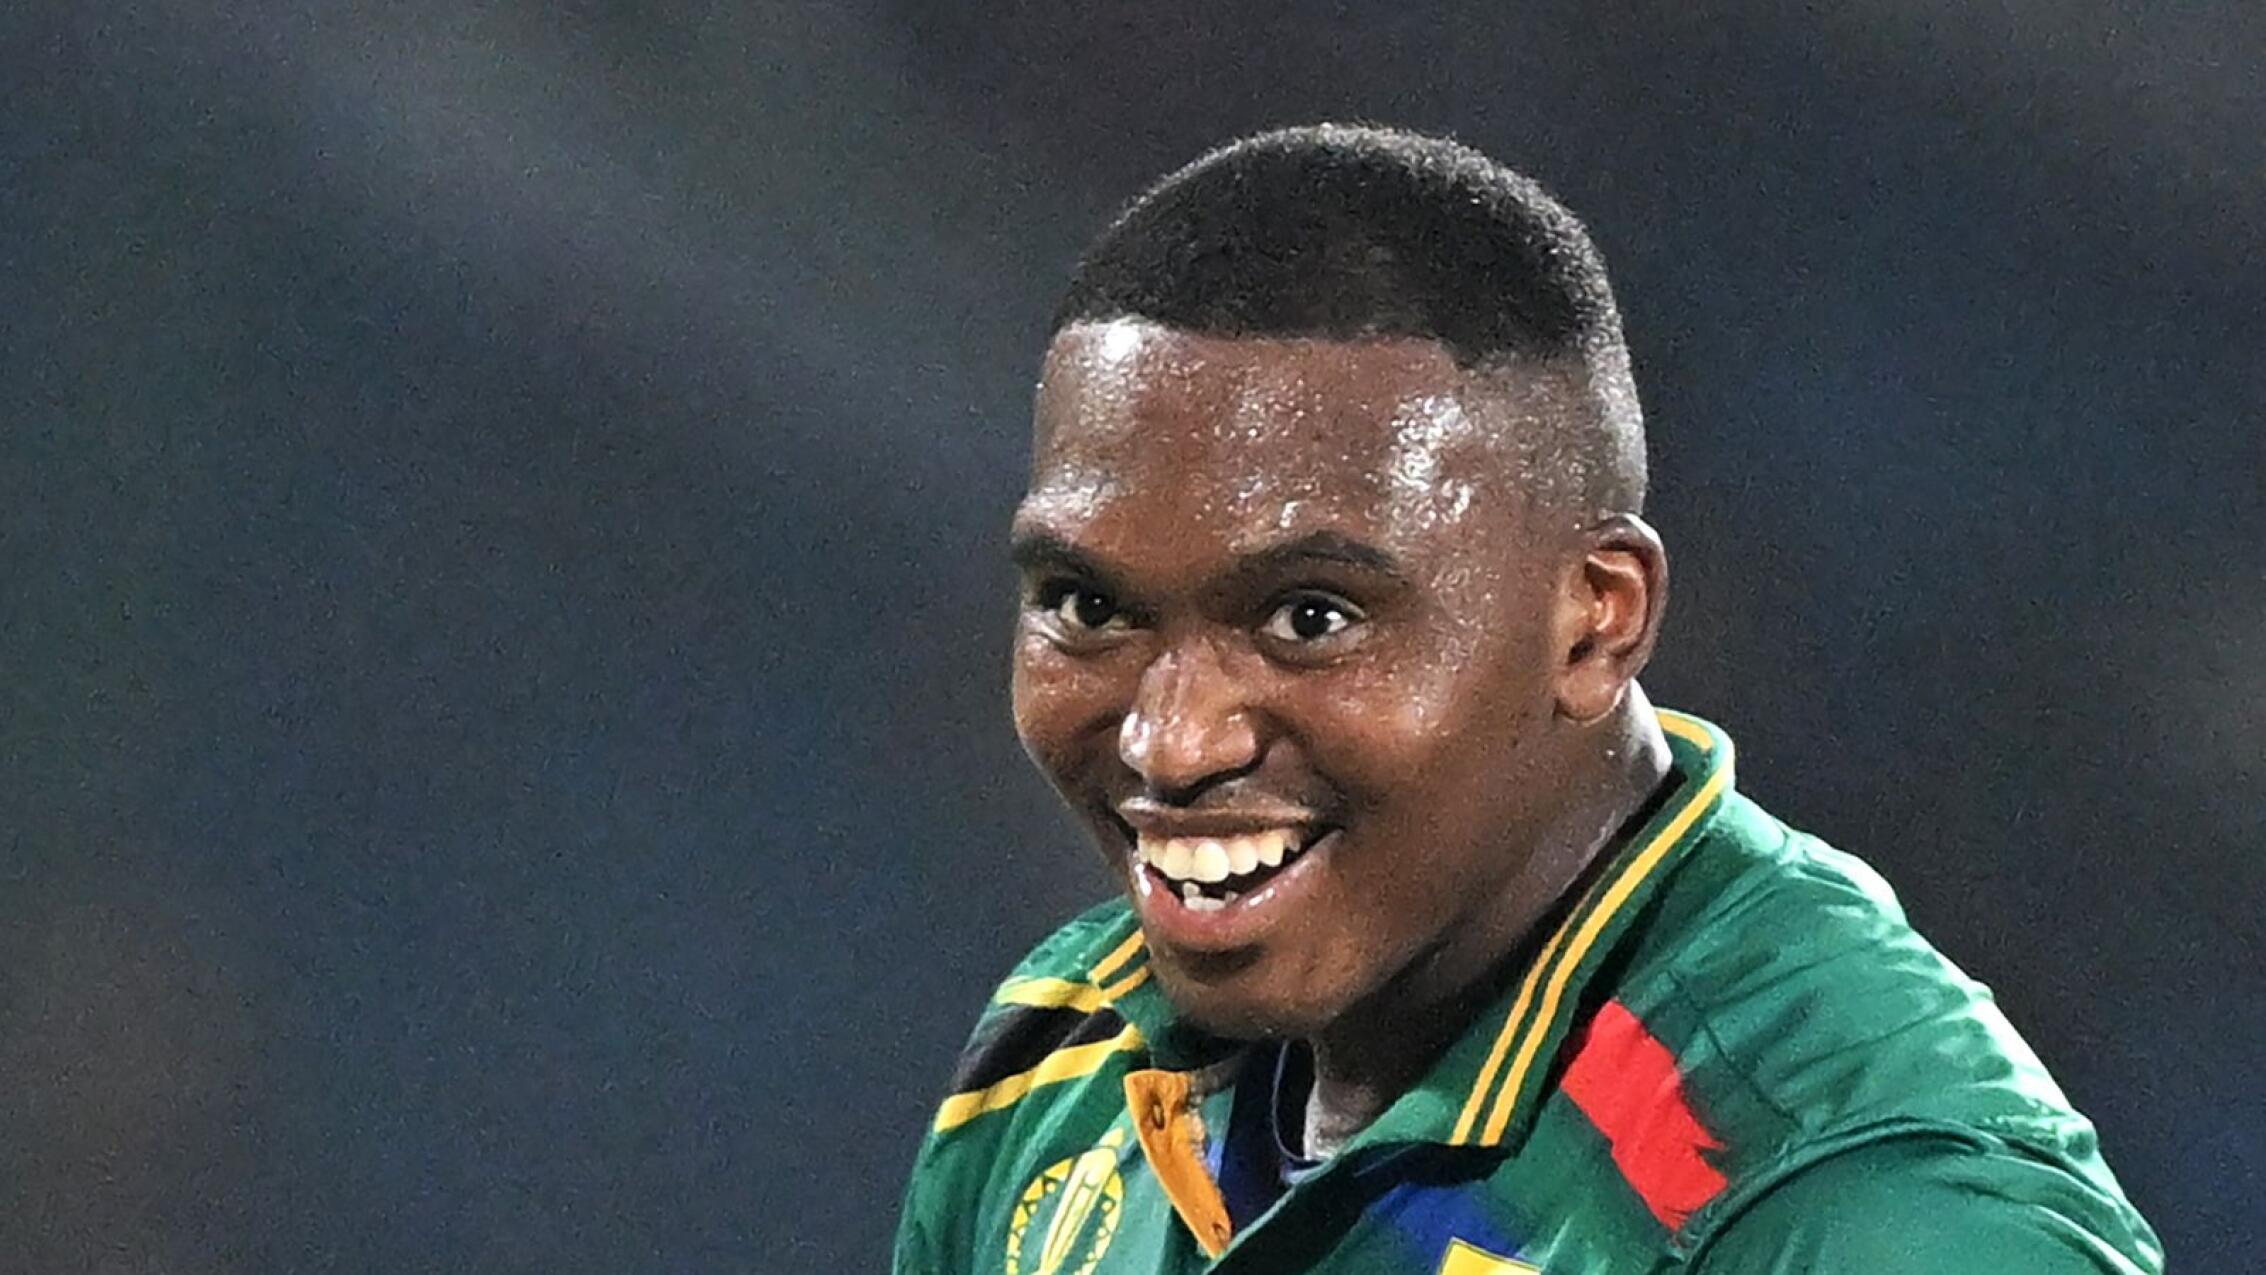 South Africa's Lungi Ngidi celebrates after taking the wicket of Sri Lanka's Charith Asalanka during the 2023 ICC Men's Cricket World Cup one-day international (ODI) match between South Africa and Sri Lanka at the Arun Jaitley Stadium in New Delhi